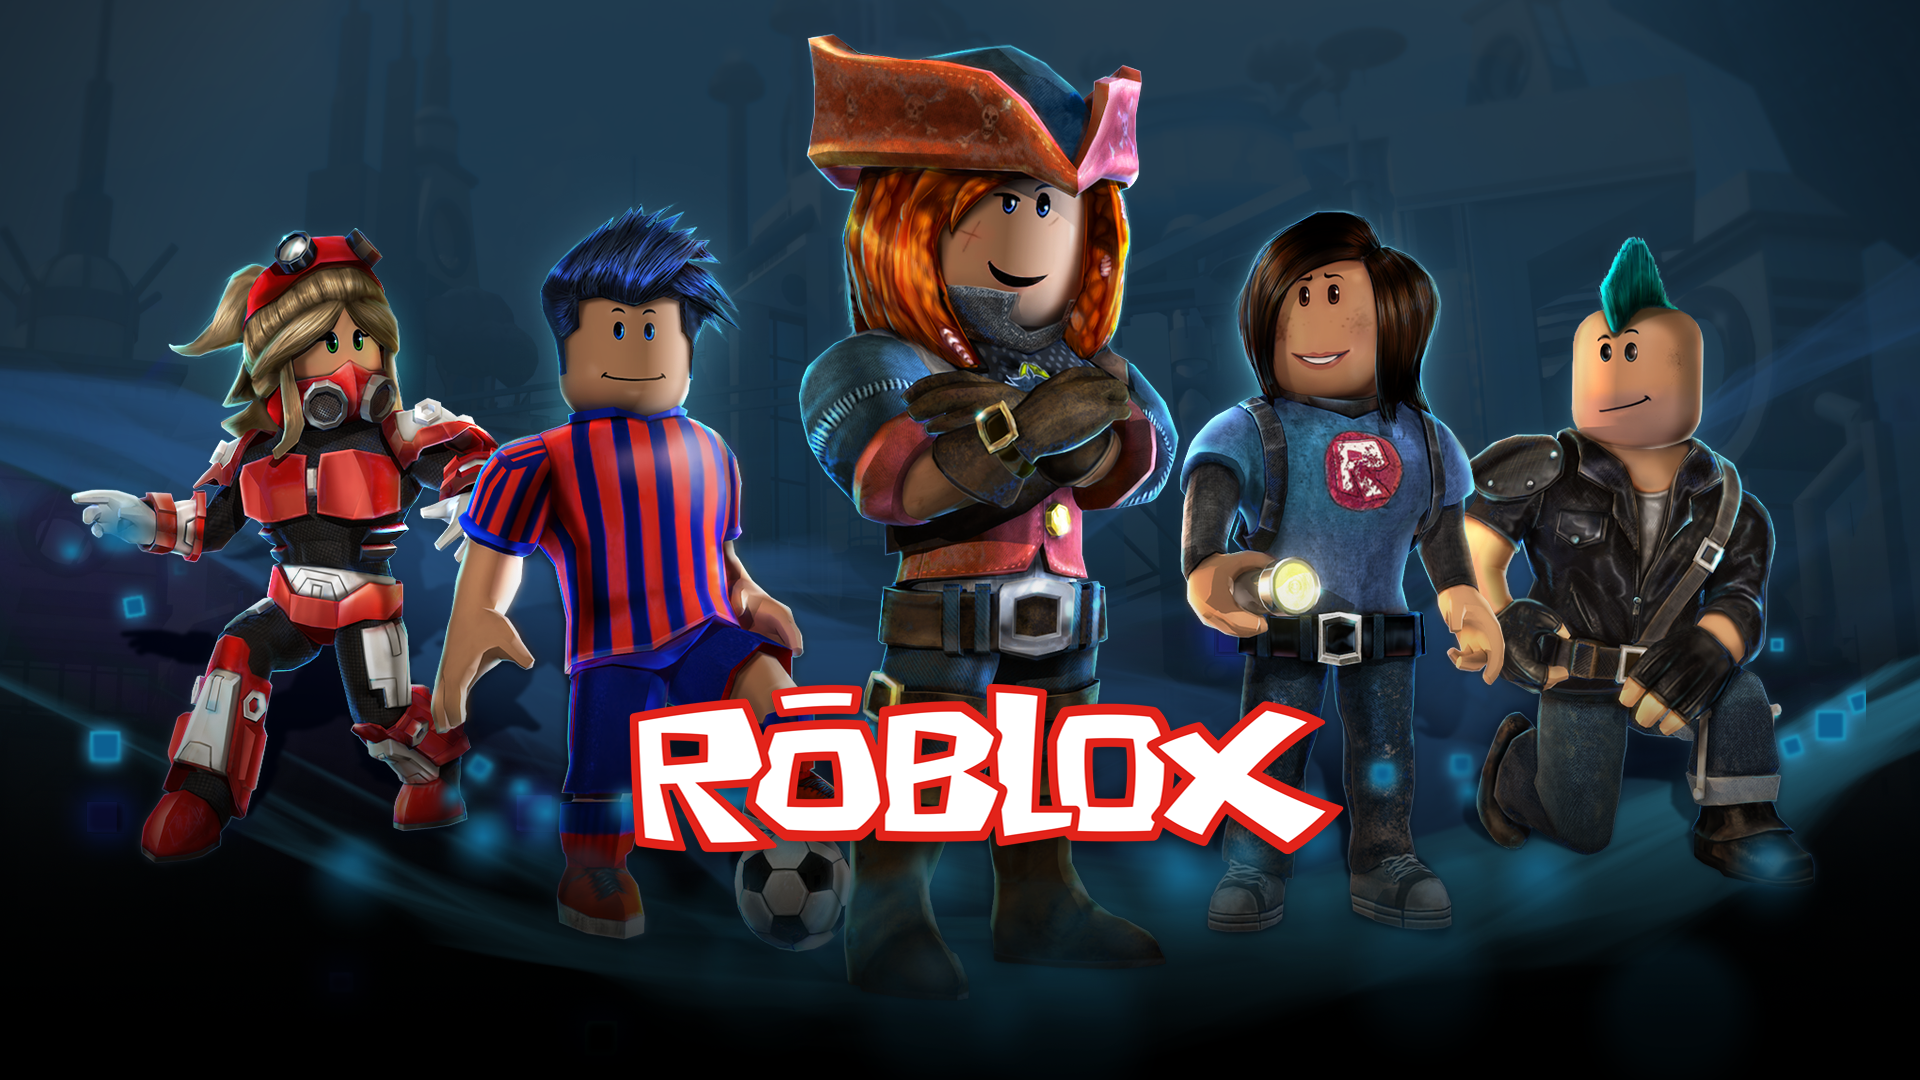 Xbox ROBLOX gameplay, Achievements, Xbox clips, Gifs, and Screenshots on